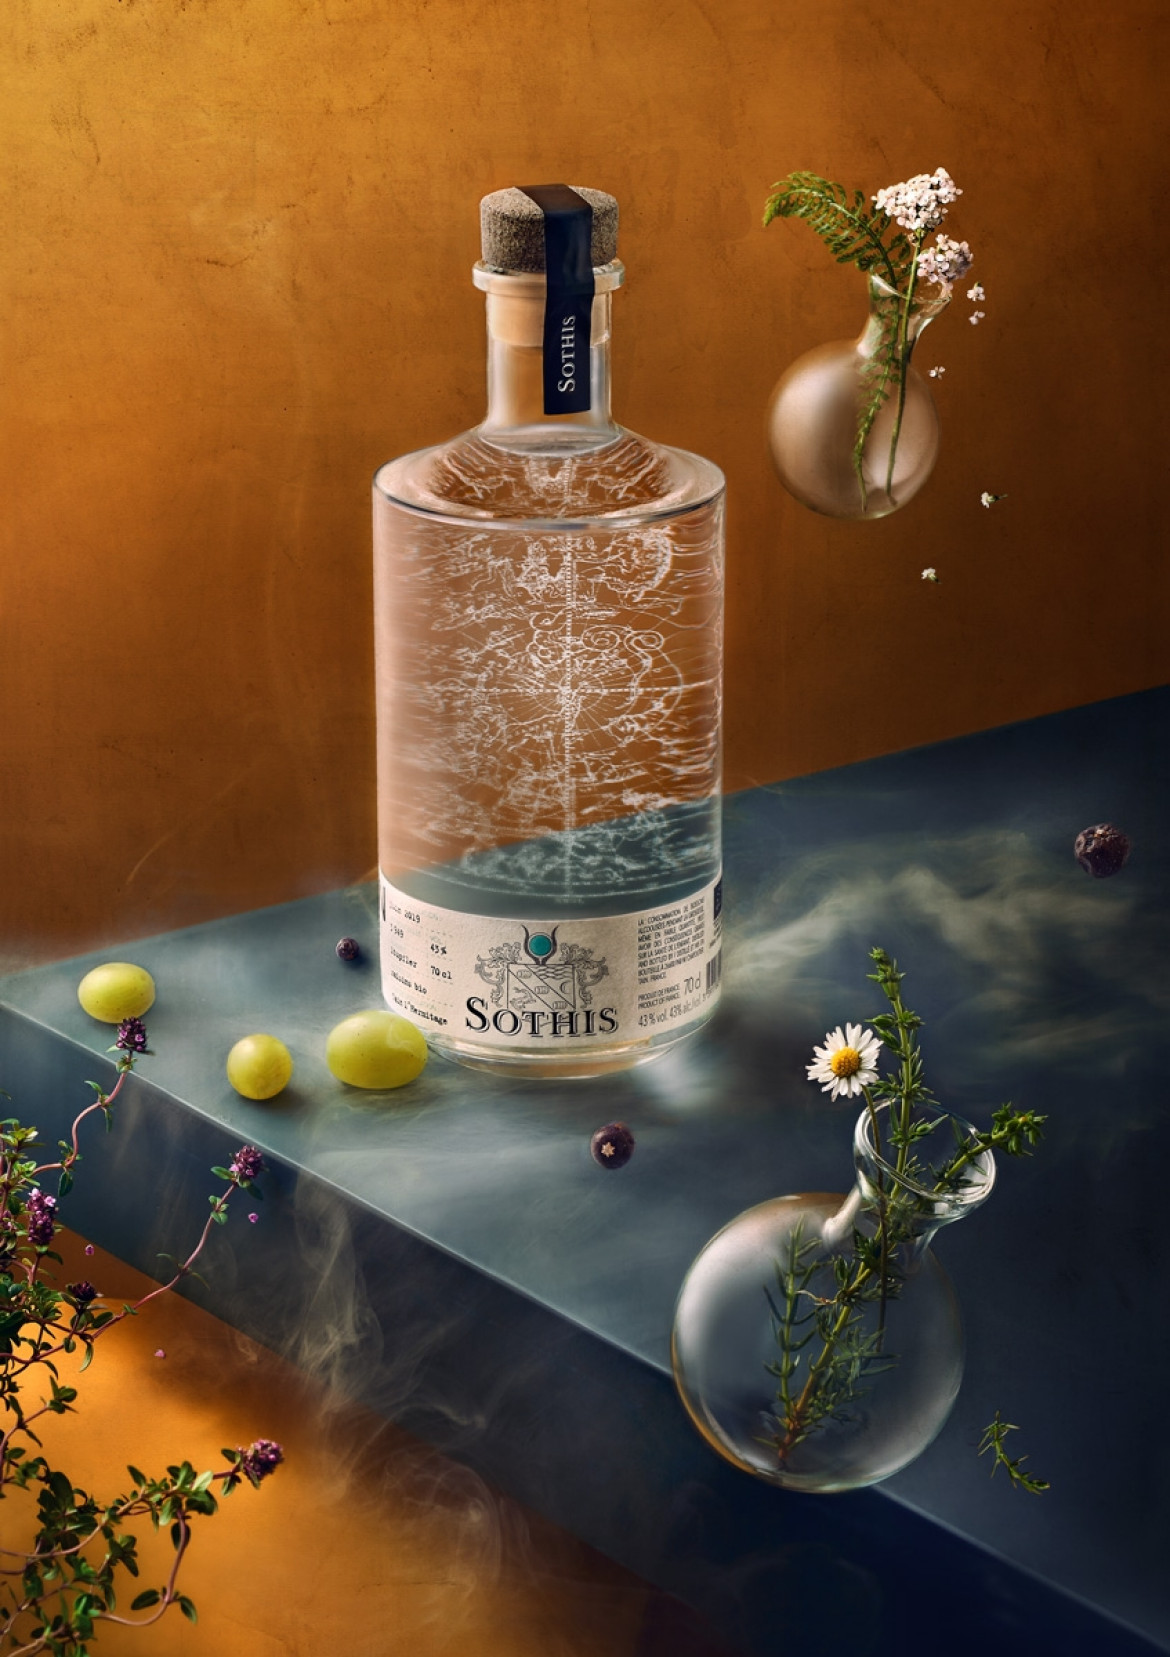 fot. Wesley Dombrecht / Mathilda Perrot, z cyklu "Sothis Gin", Advertising Photographer of the Year / 